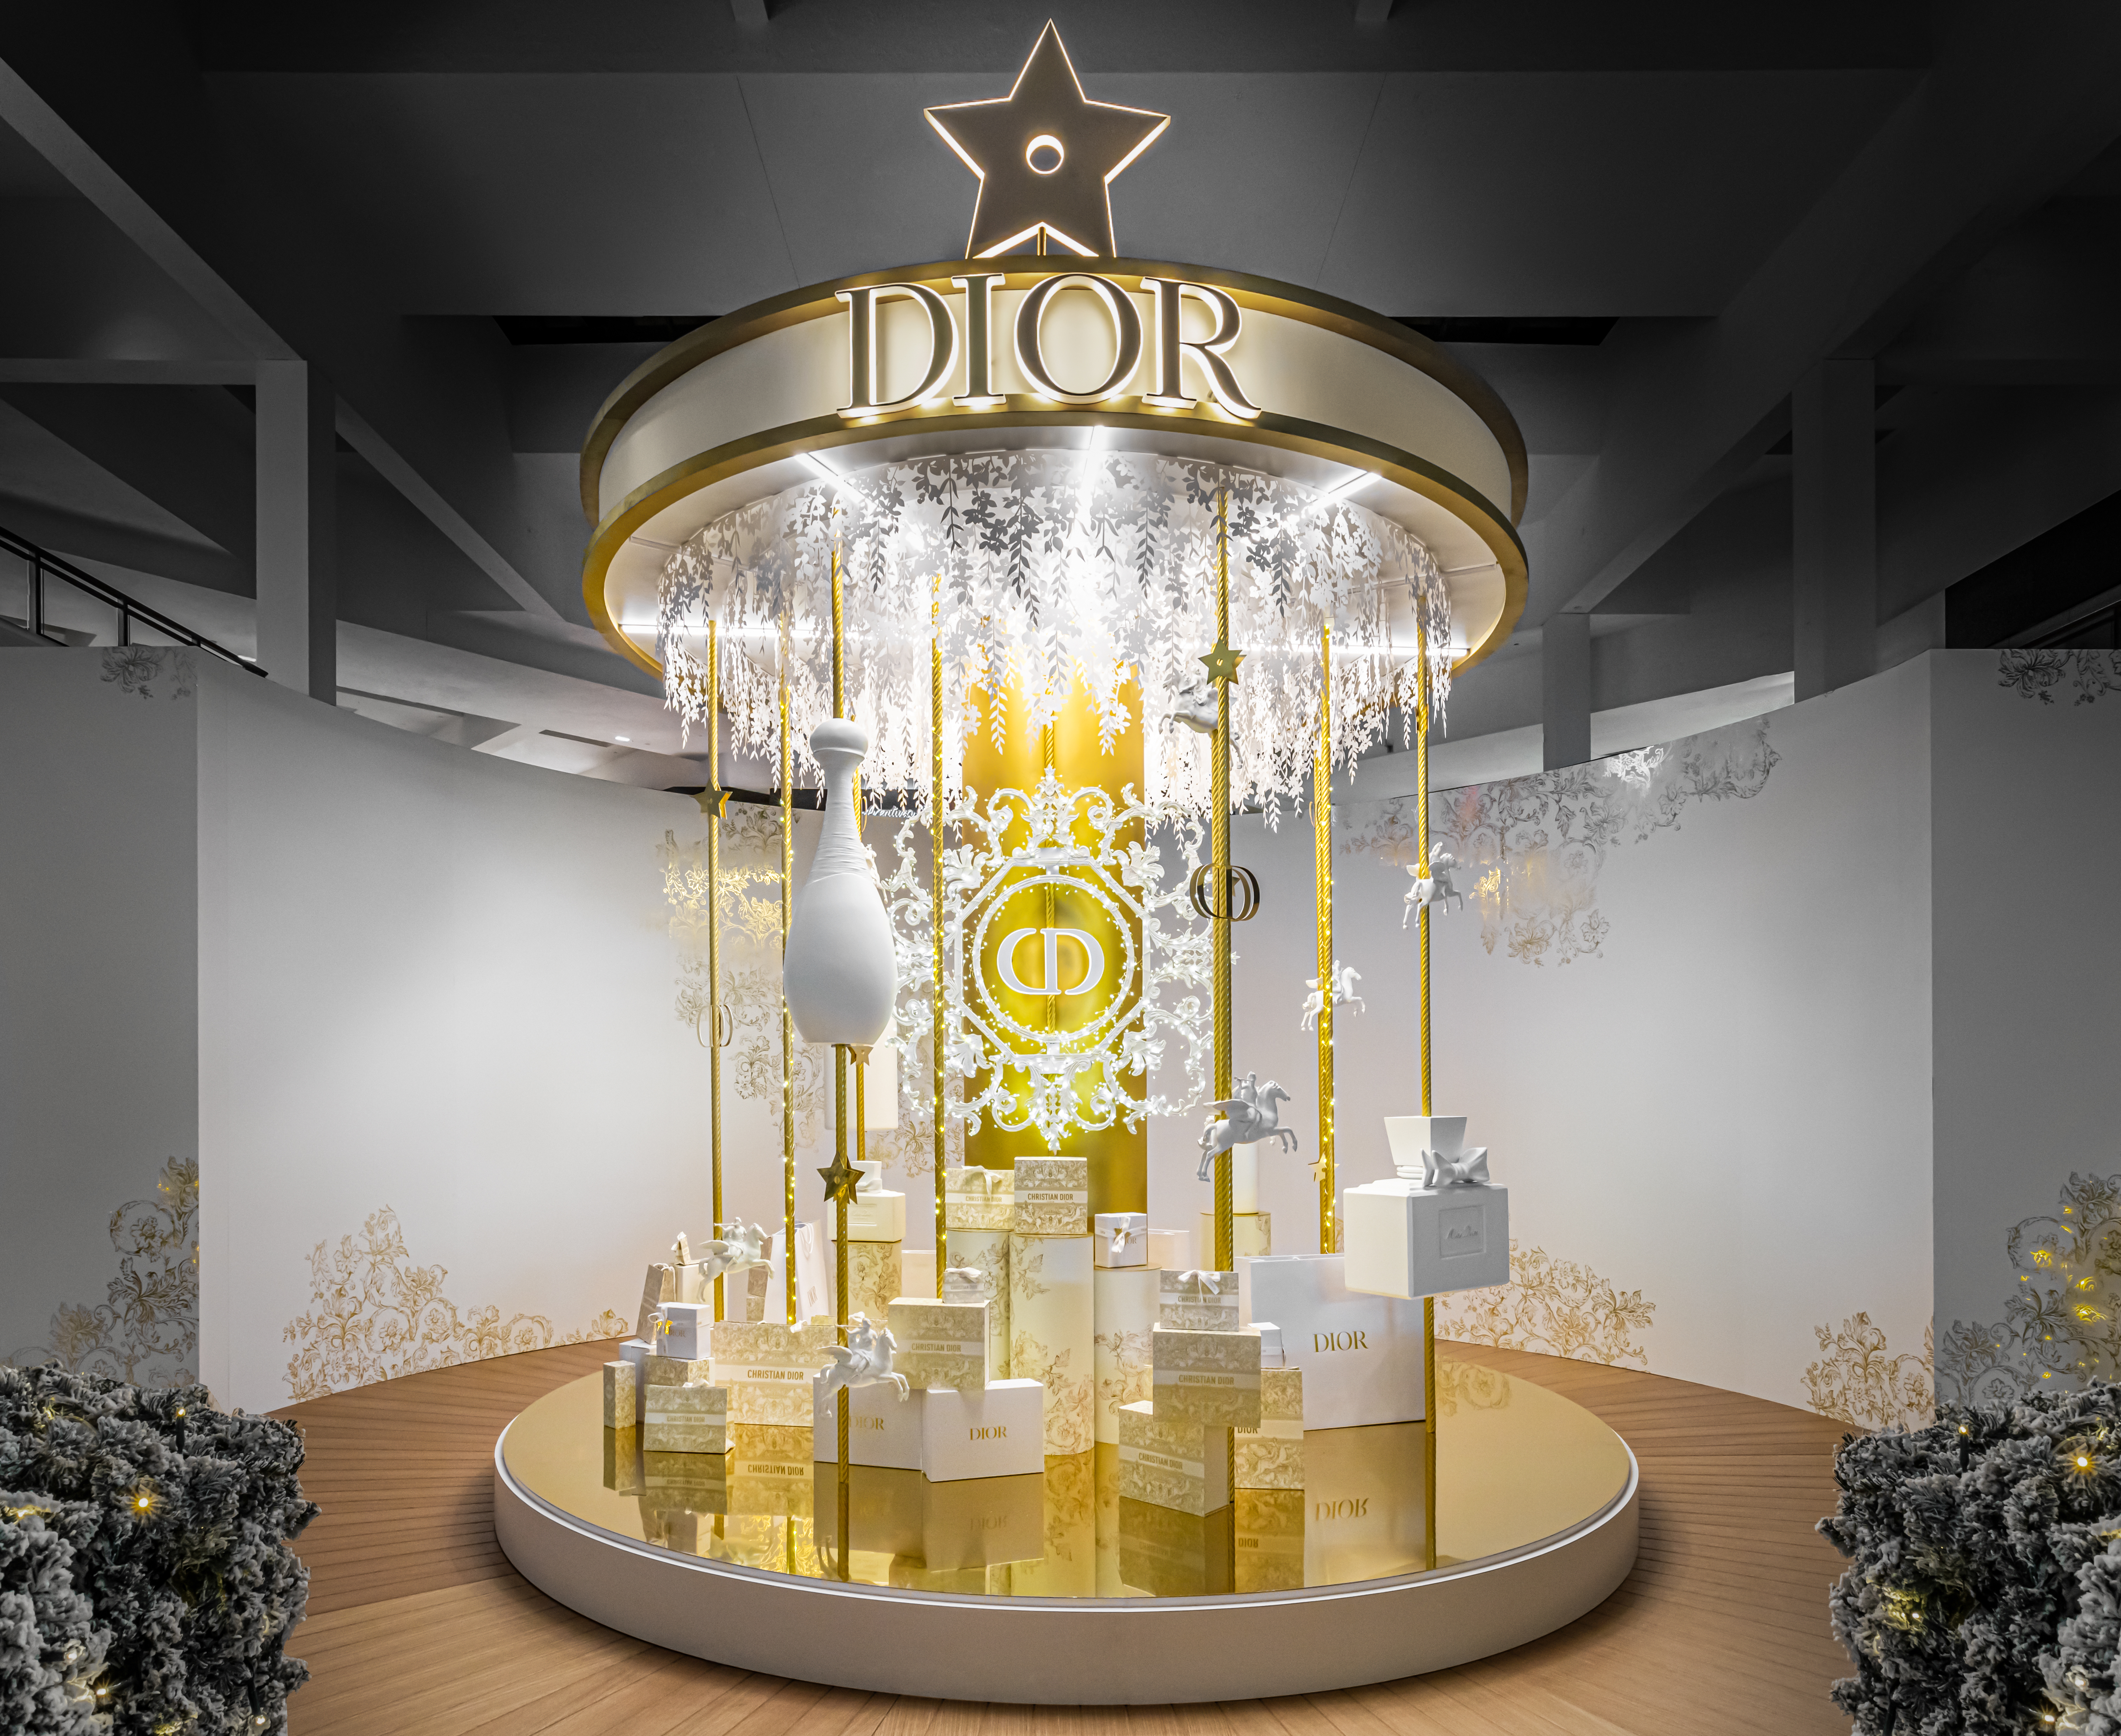 Courtesy_Emilio_Collavino_for_Parfums_Christian_Dior_2.png